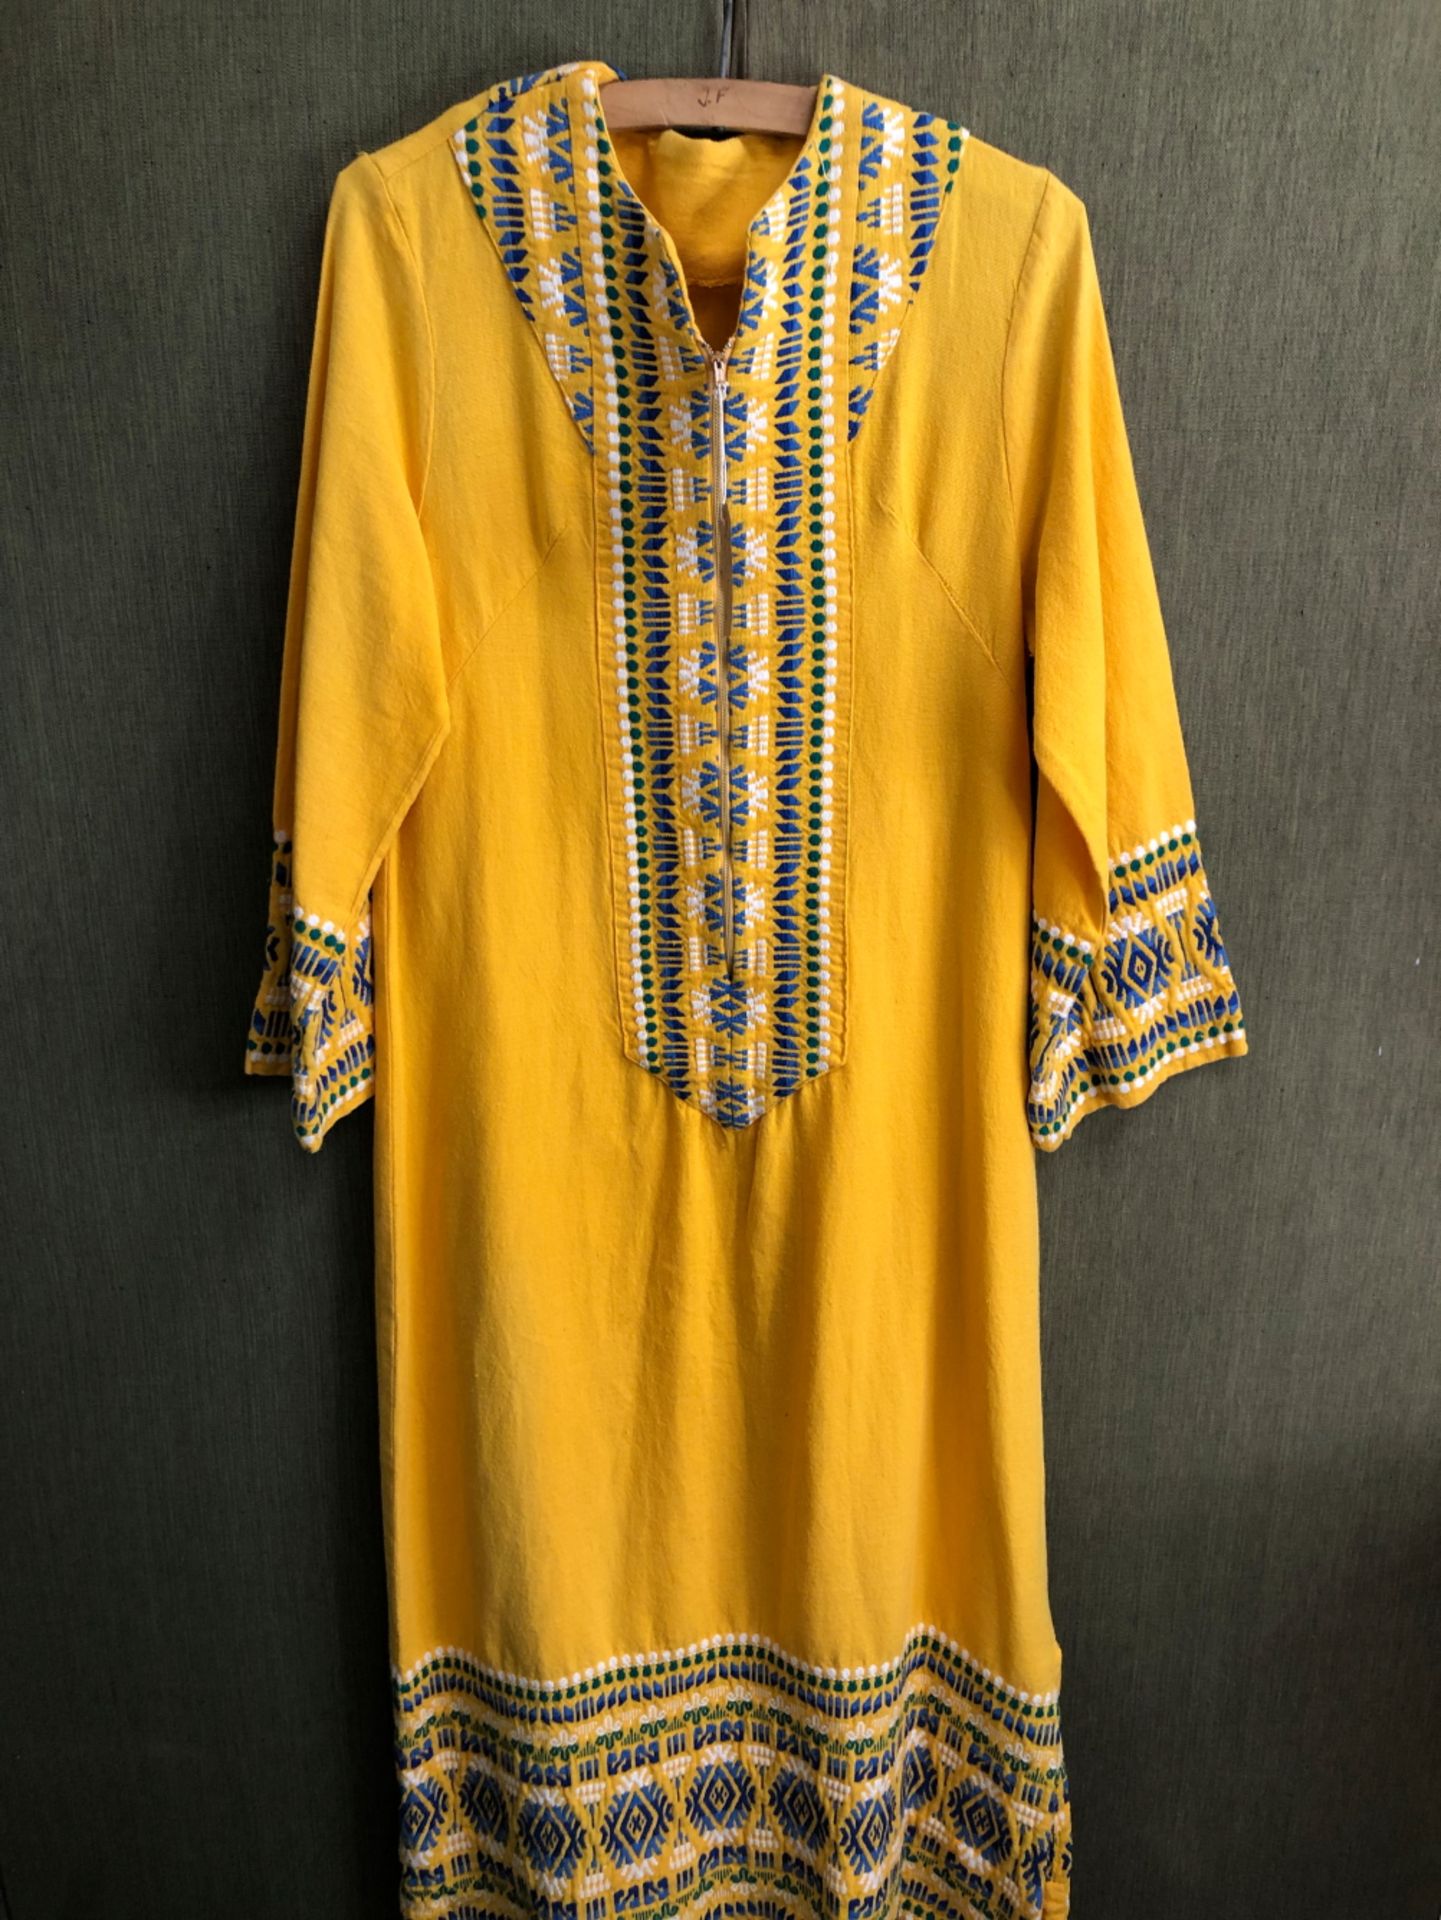 KAFTAN: A YELLOW GROUND KAFTAN DRESS TRIMMED WITH BLUE, GREEN AND WHITE GEOMETRIC BANDS, SLEEVE